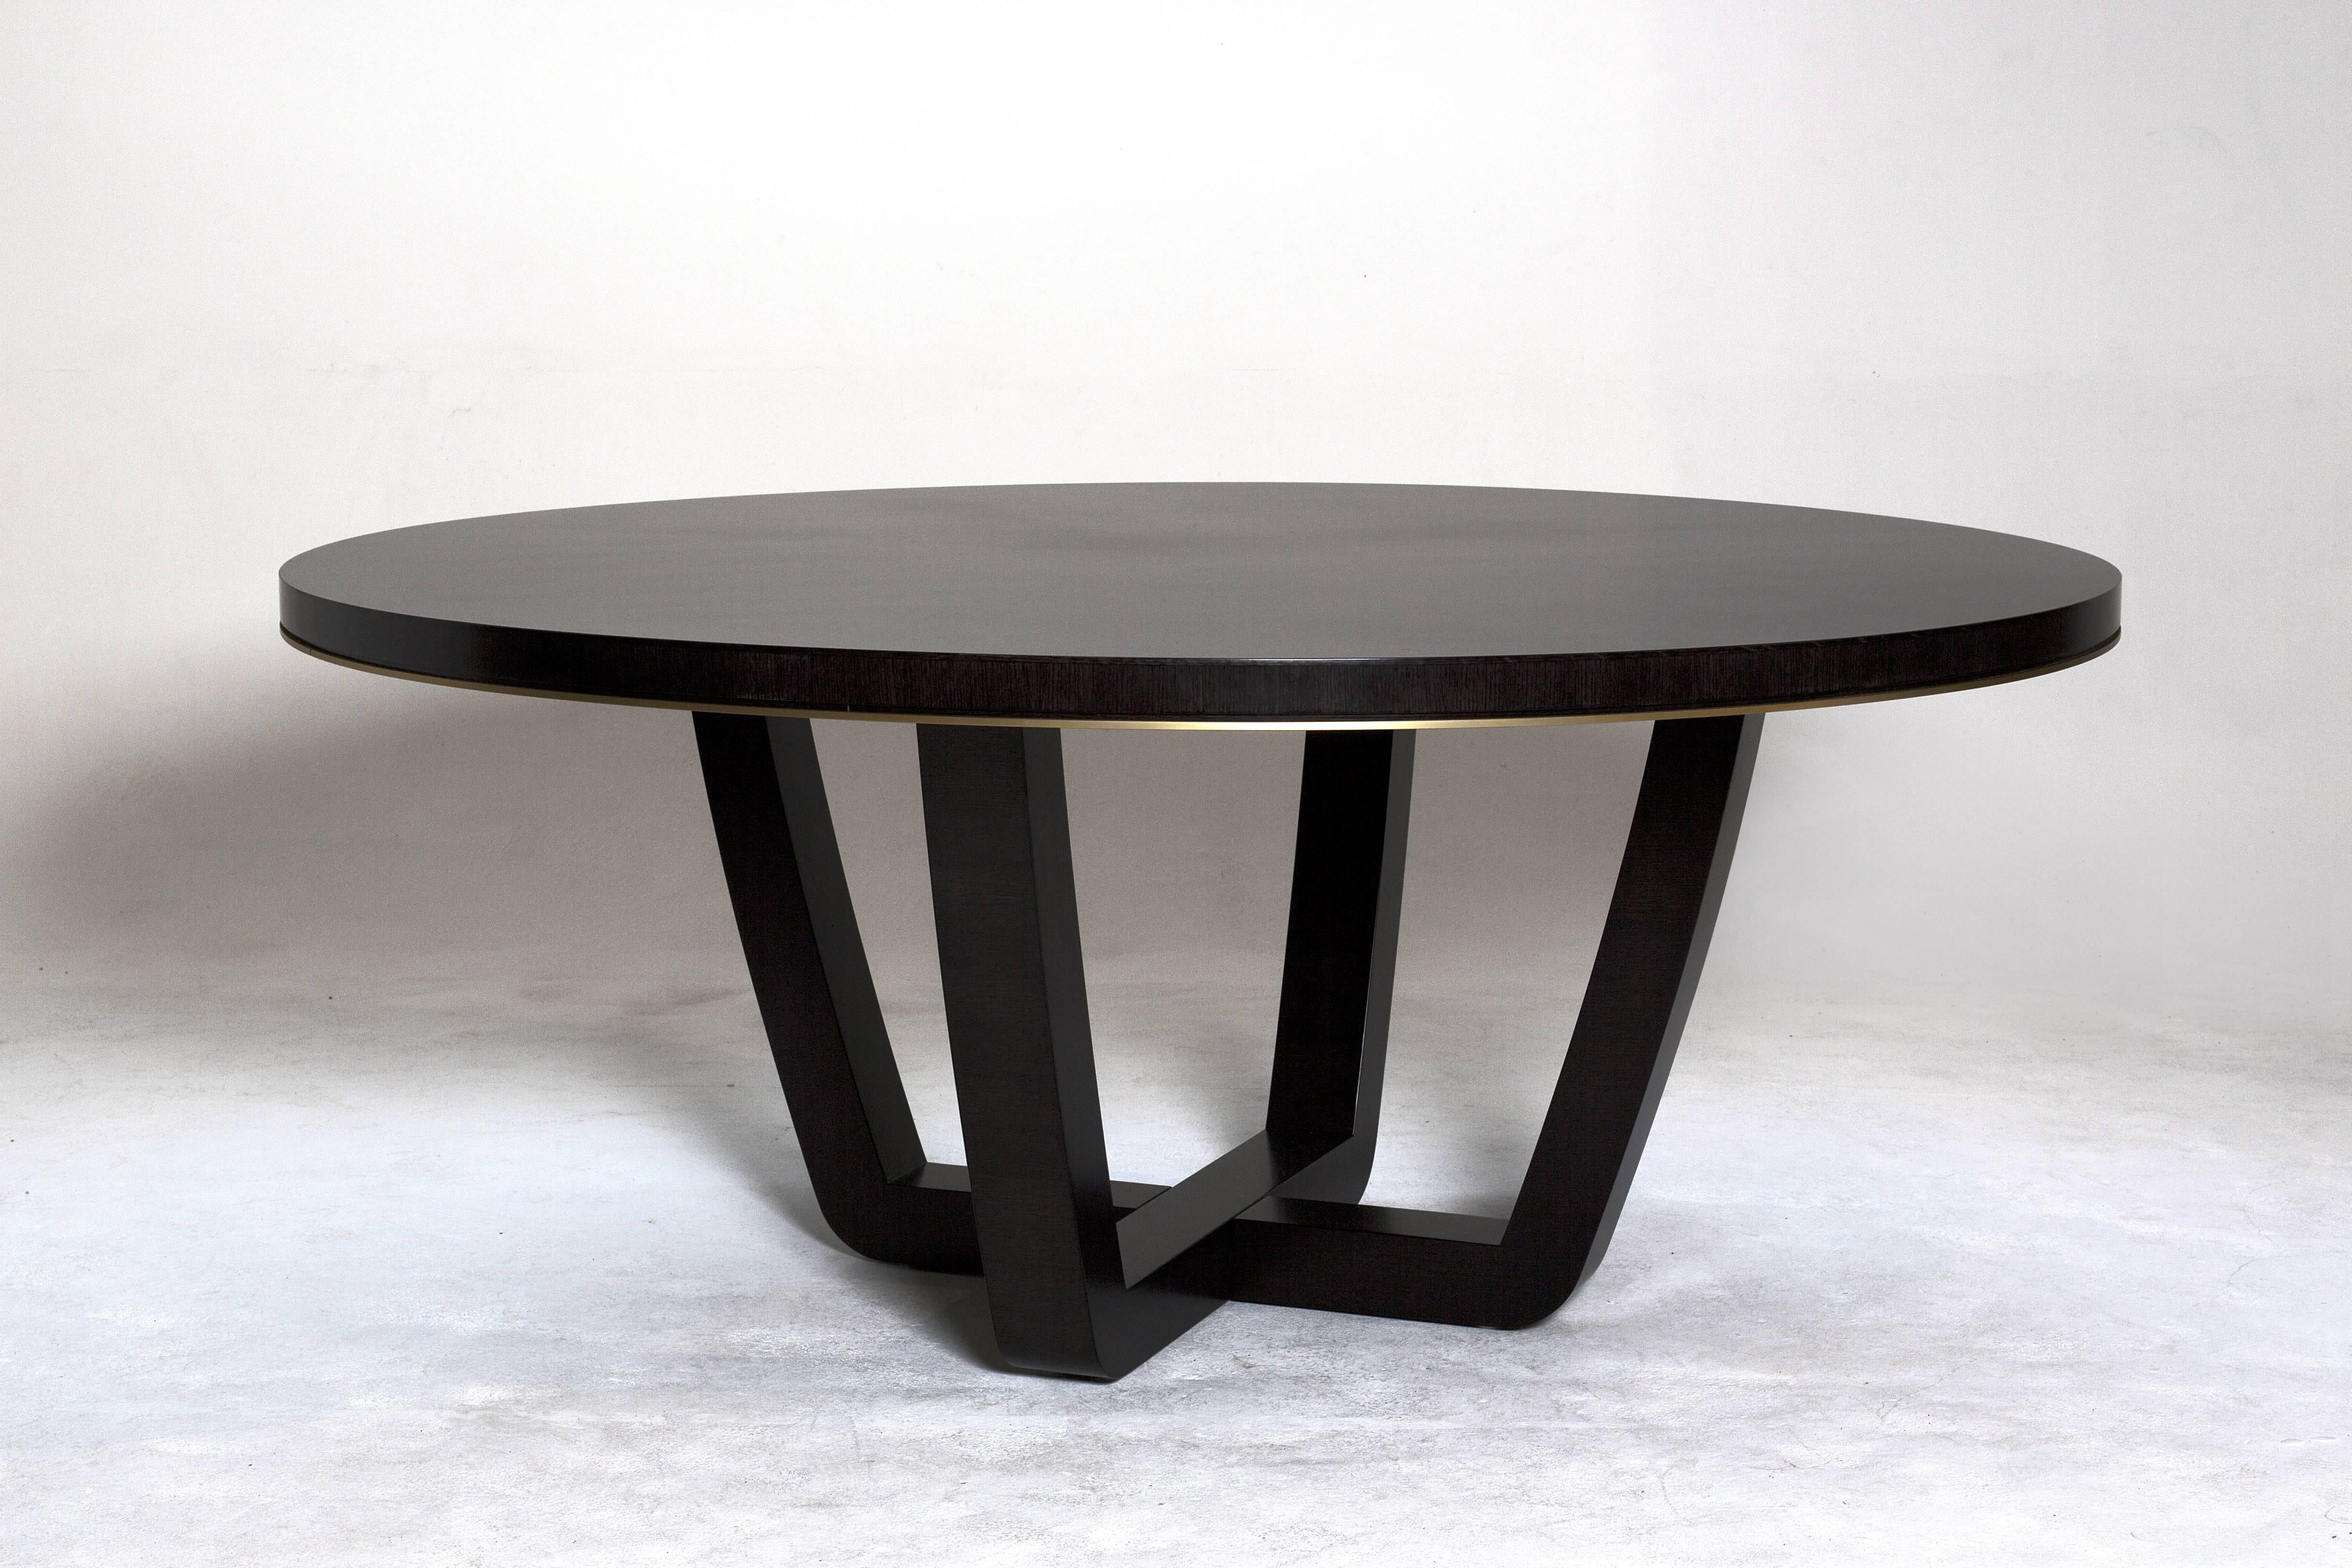 A beautifully understated dining or centre table finished in a semi satin dark tinted quarter sawn oak with a glamorous brushed brass moulding.

A contemporary style with crafted table top and cruciform base. The satin finish offers a modern,